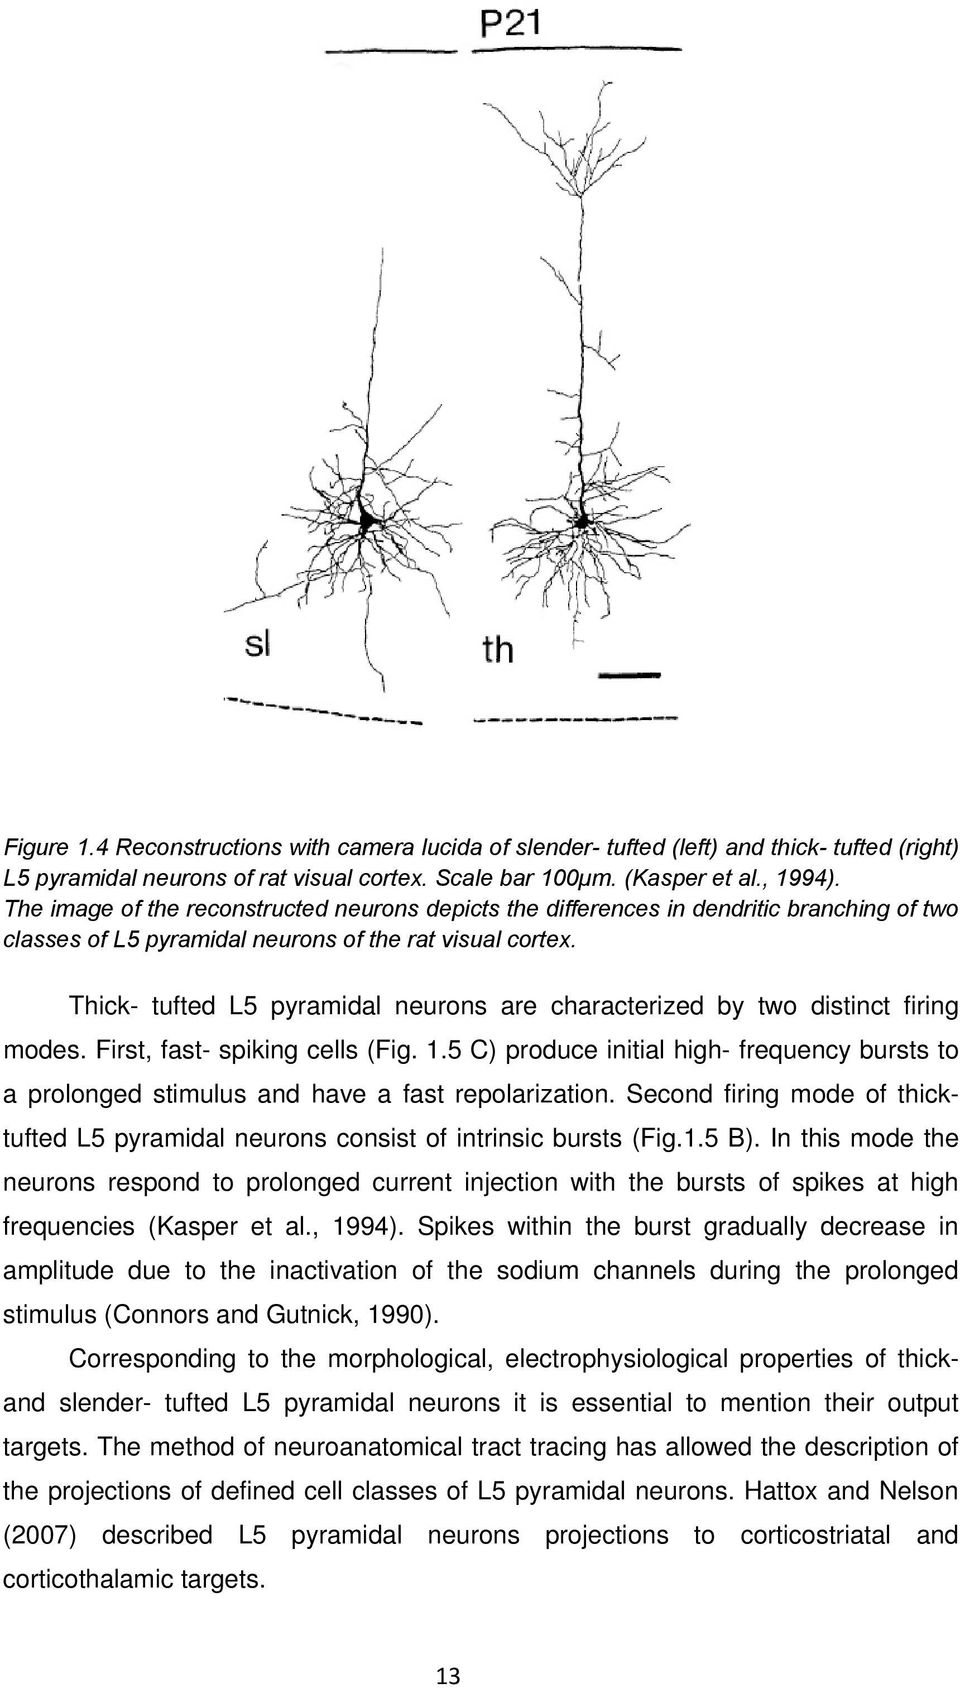 Thick- tufted L5 pyramidal neurons are characterized by two distinct firing modes. First, fast- spiking cells (Fig. 1.